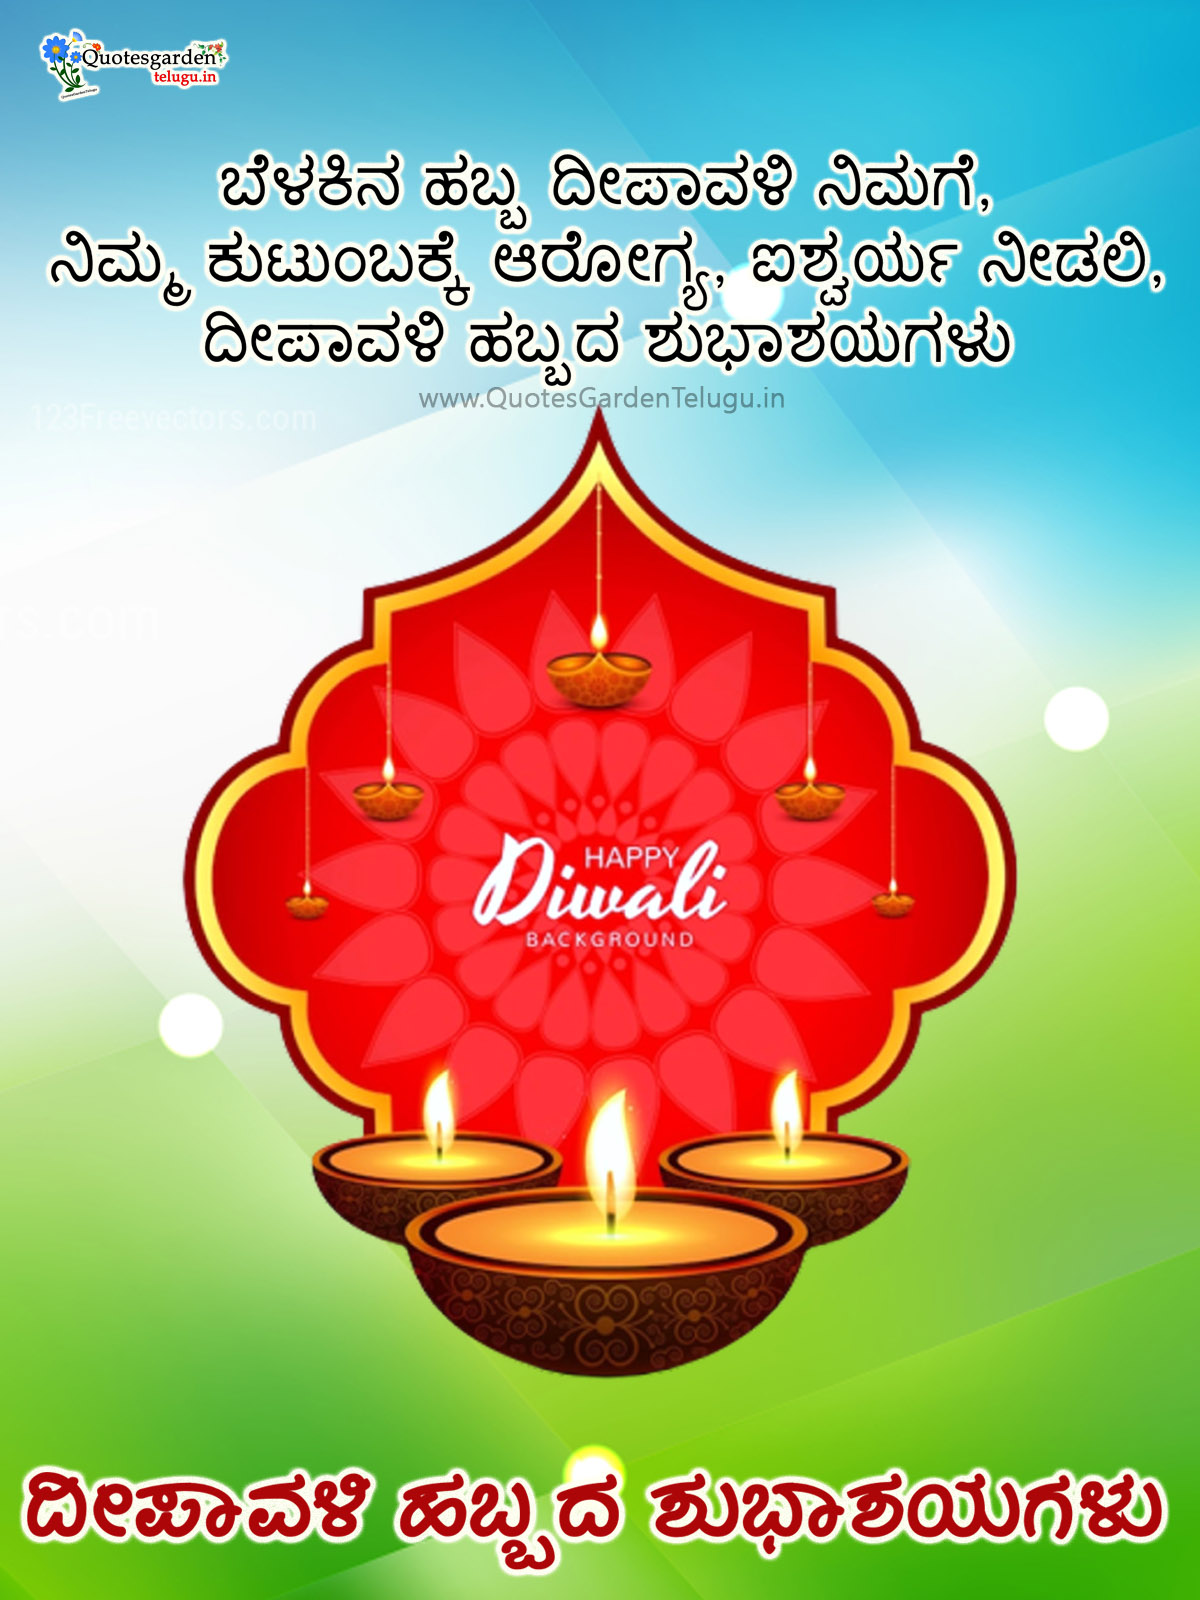 new diwali wallpapers vector images in kannada free download | QUOTES  GARDEN TELUGU | Telugu Quotes | English Quotes | Hindi Quotes |